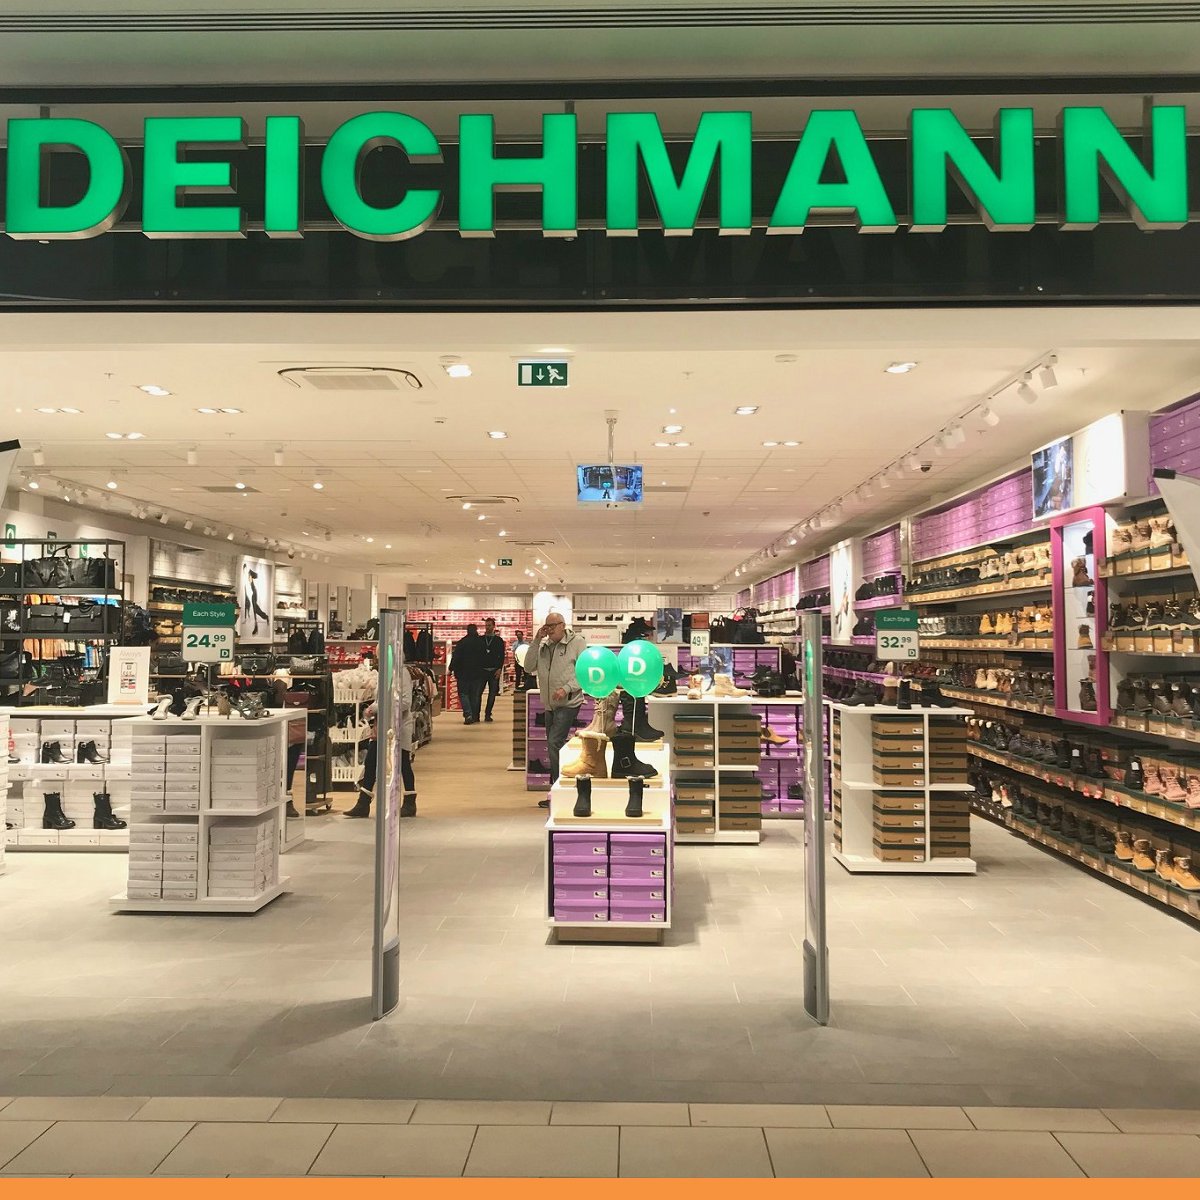 Lakeside on Twitter: "The brand new store from Deichmann is now open! Find the store on Level 1 Wilko and check out their amazing selection of shoes for all occasions.